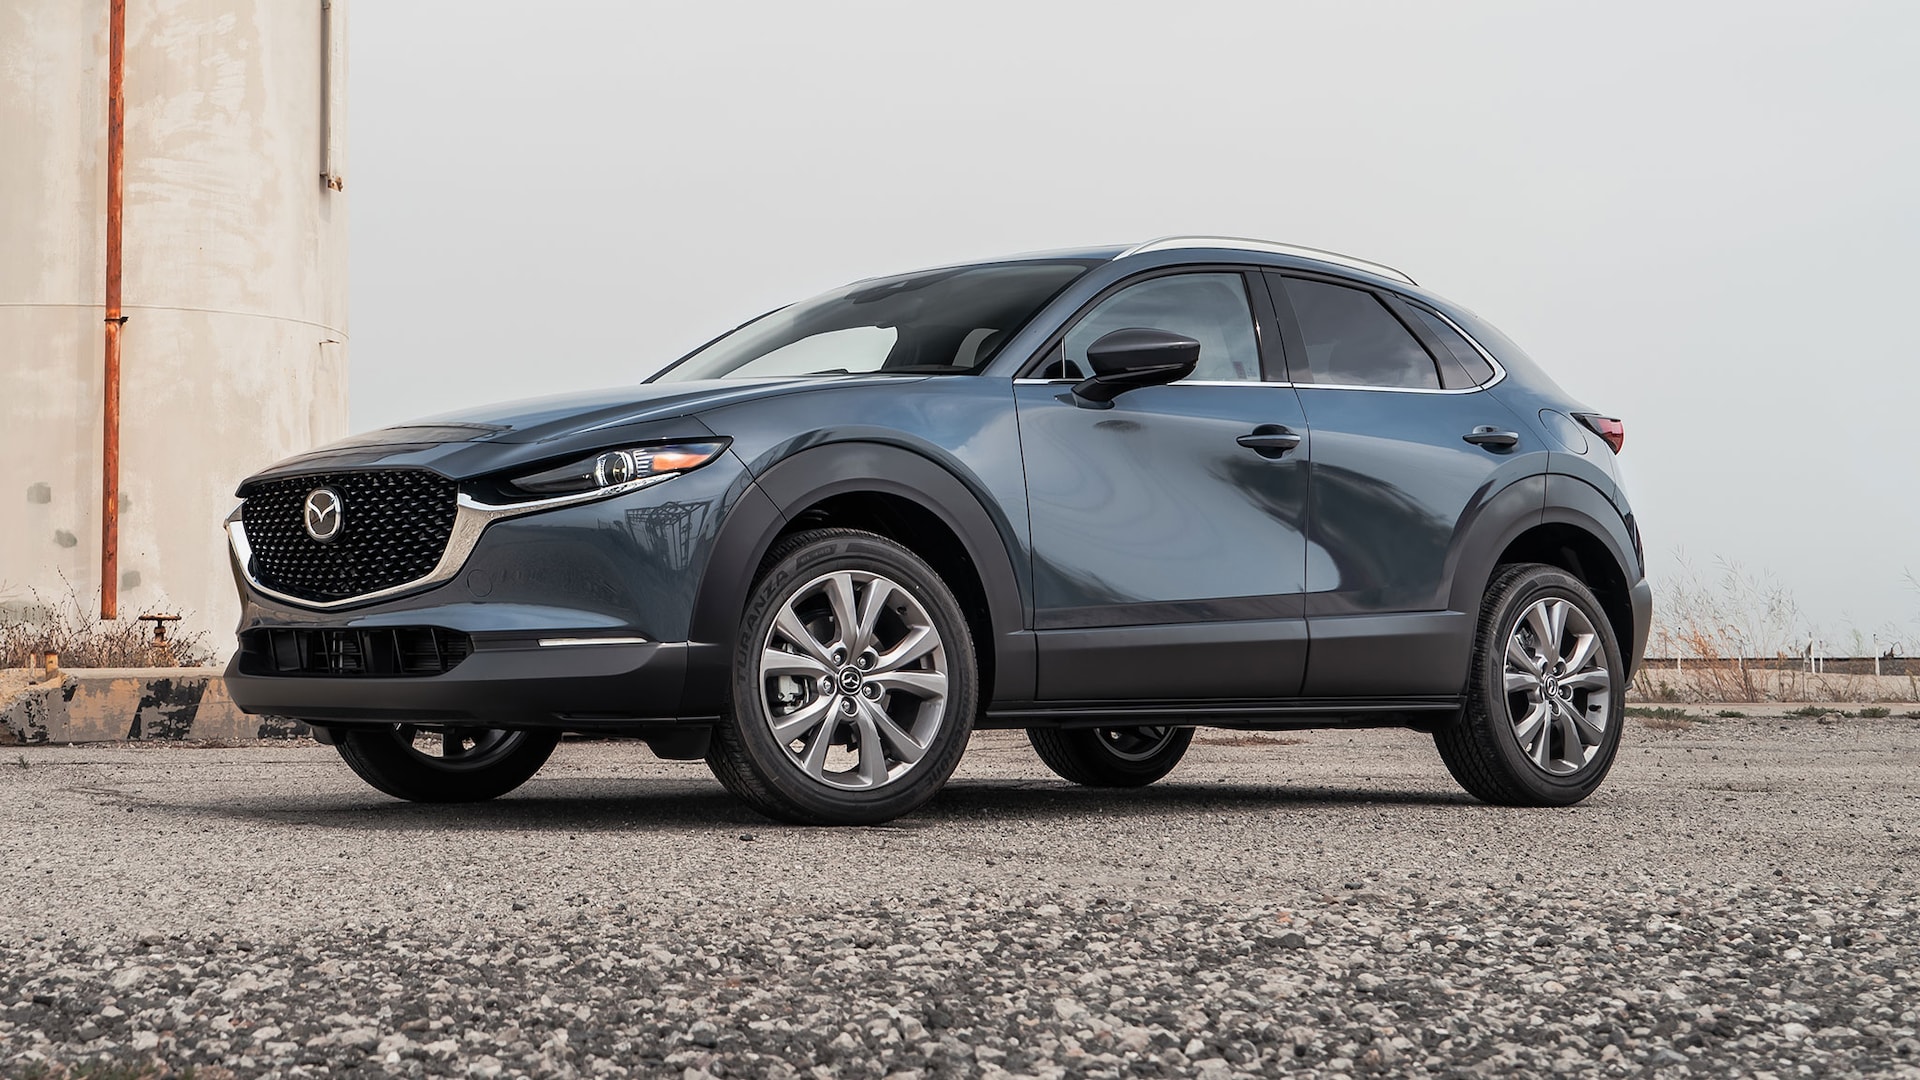 2020 Mazda CX-30 Premium AWD Arrival: One Year With Mazda's Newest SUV